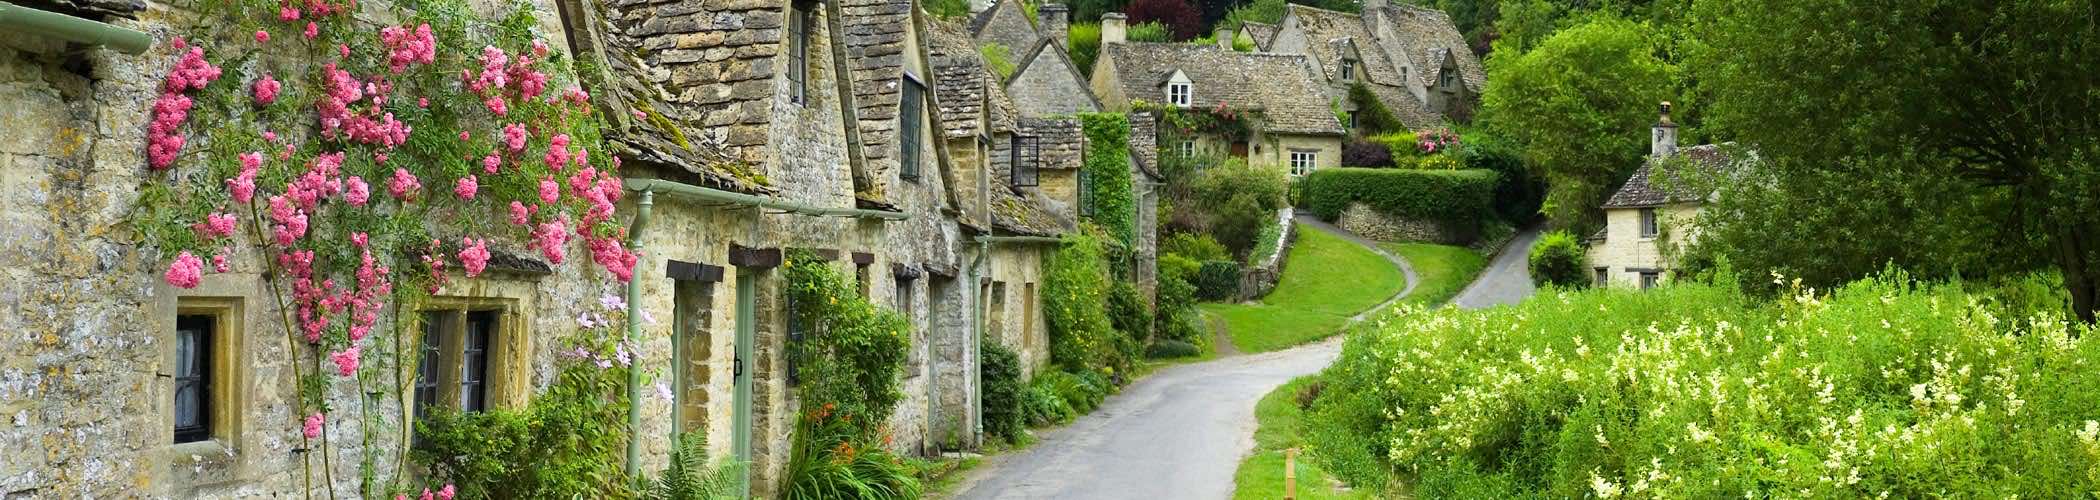 Cotswold romantic holiday cottages and breaks